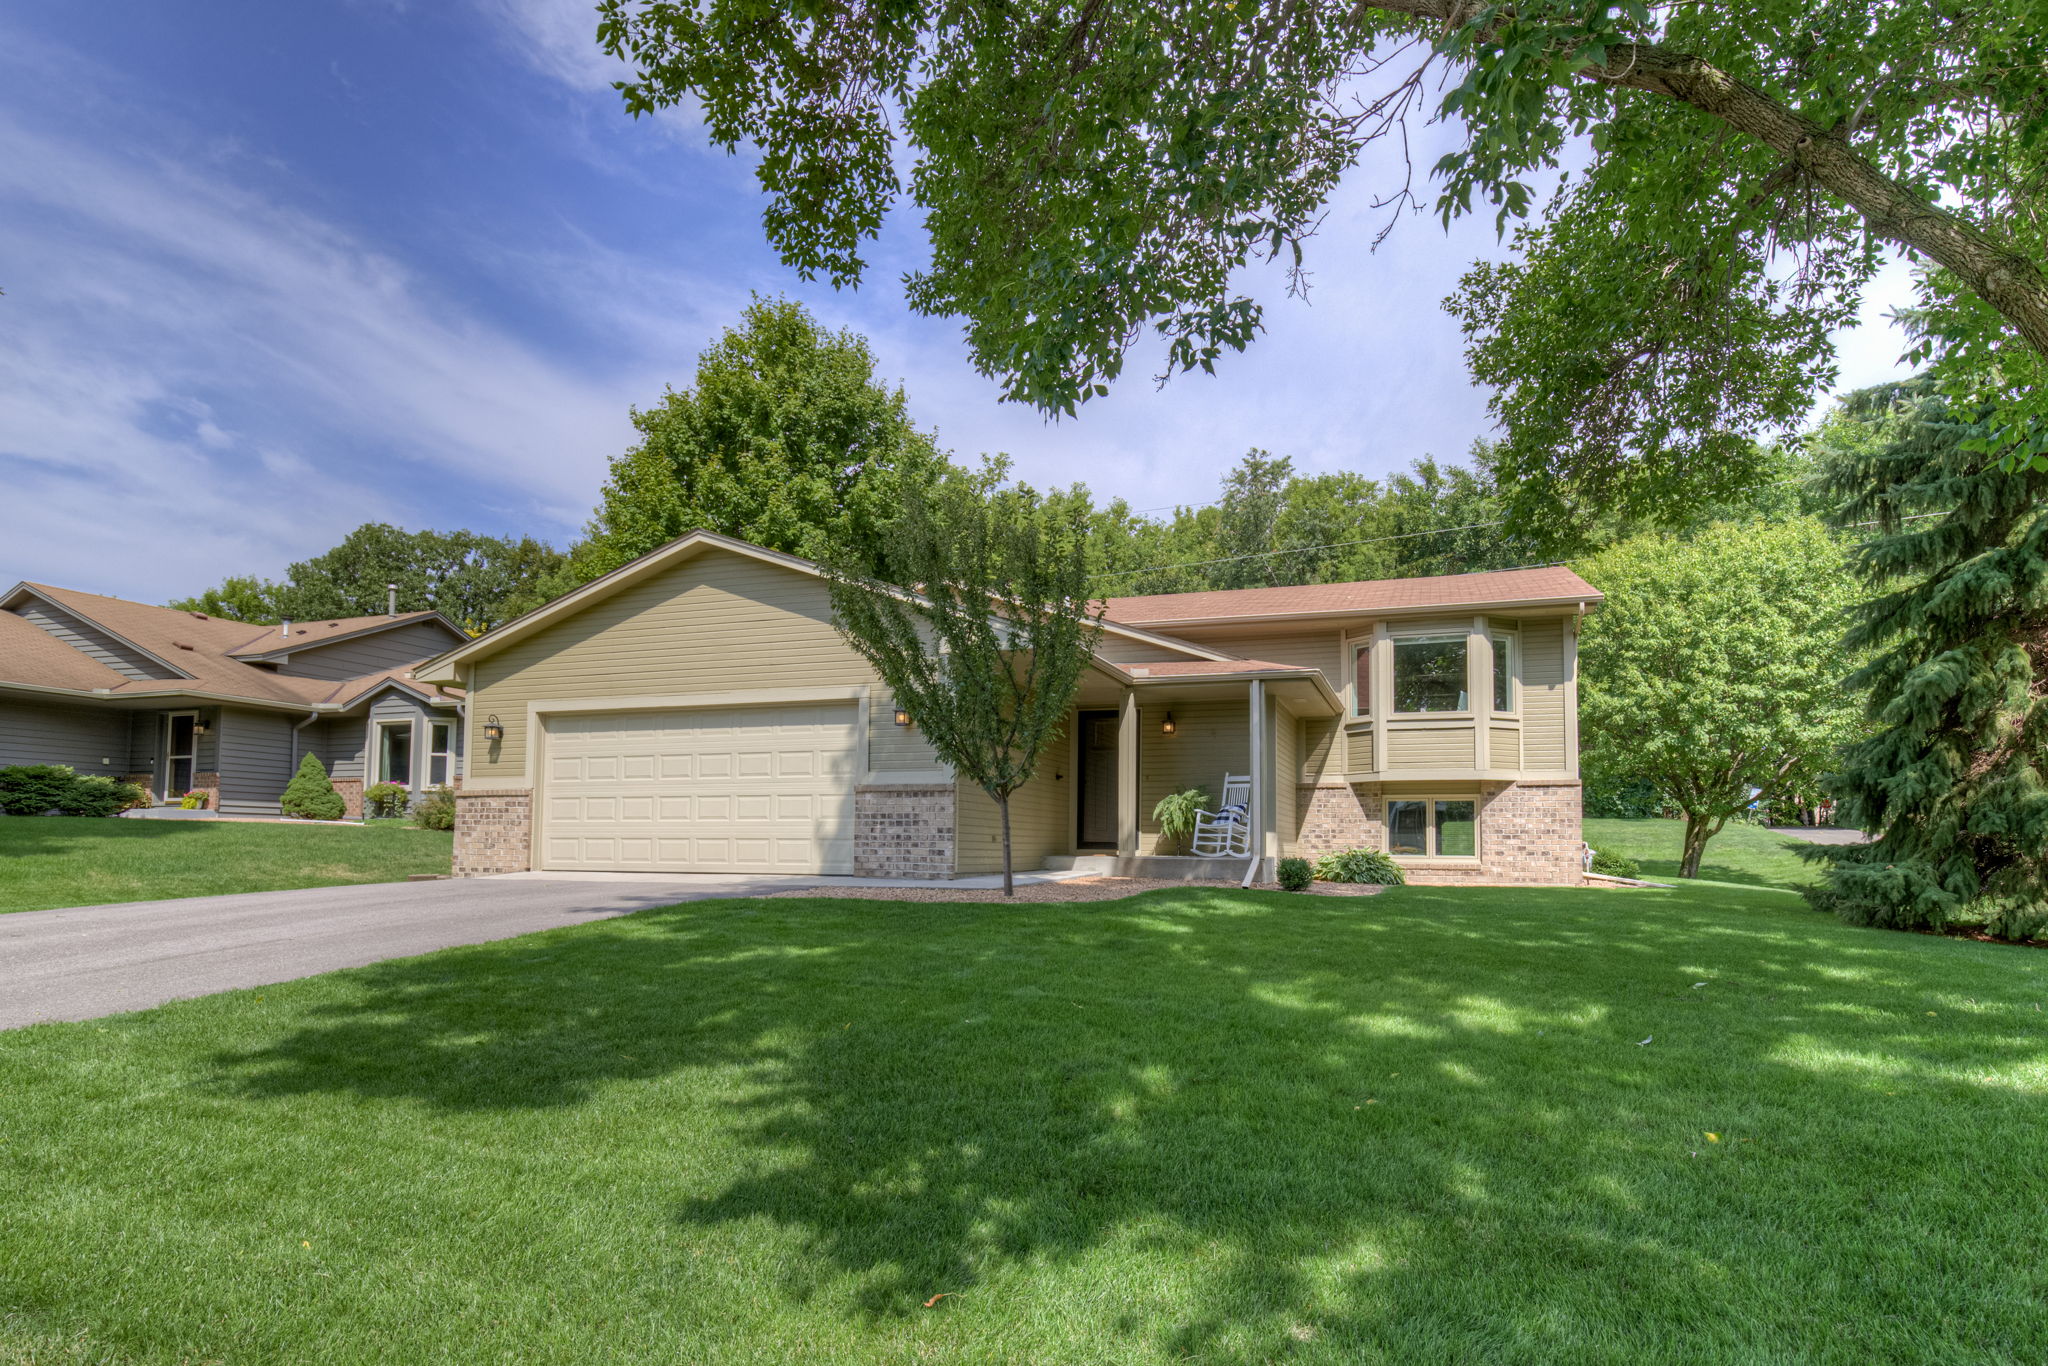  15222 68th Place N, Maple Grove, MN 55311, US